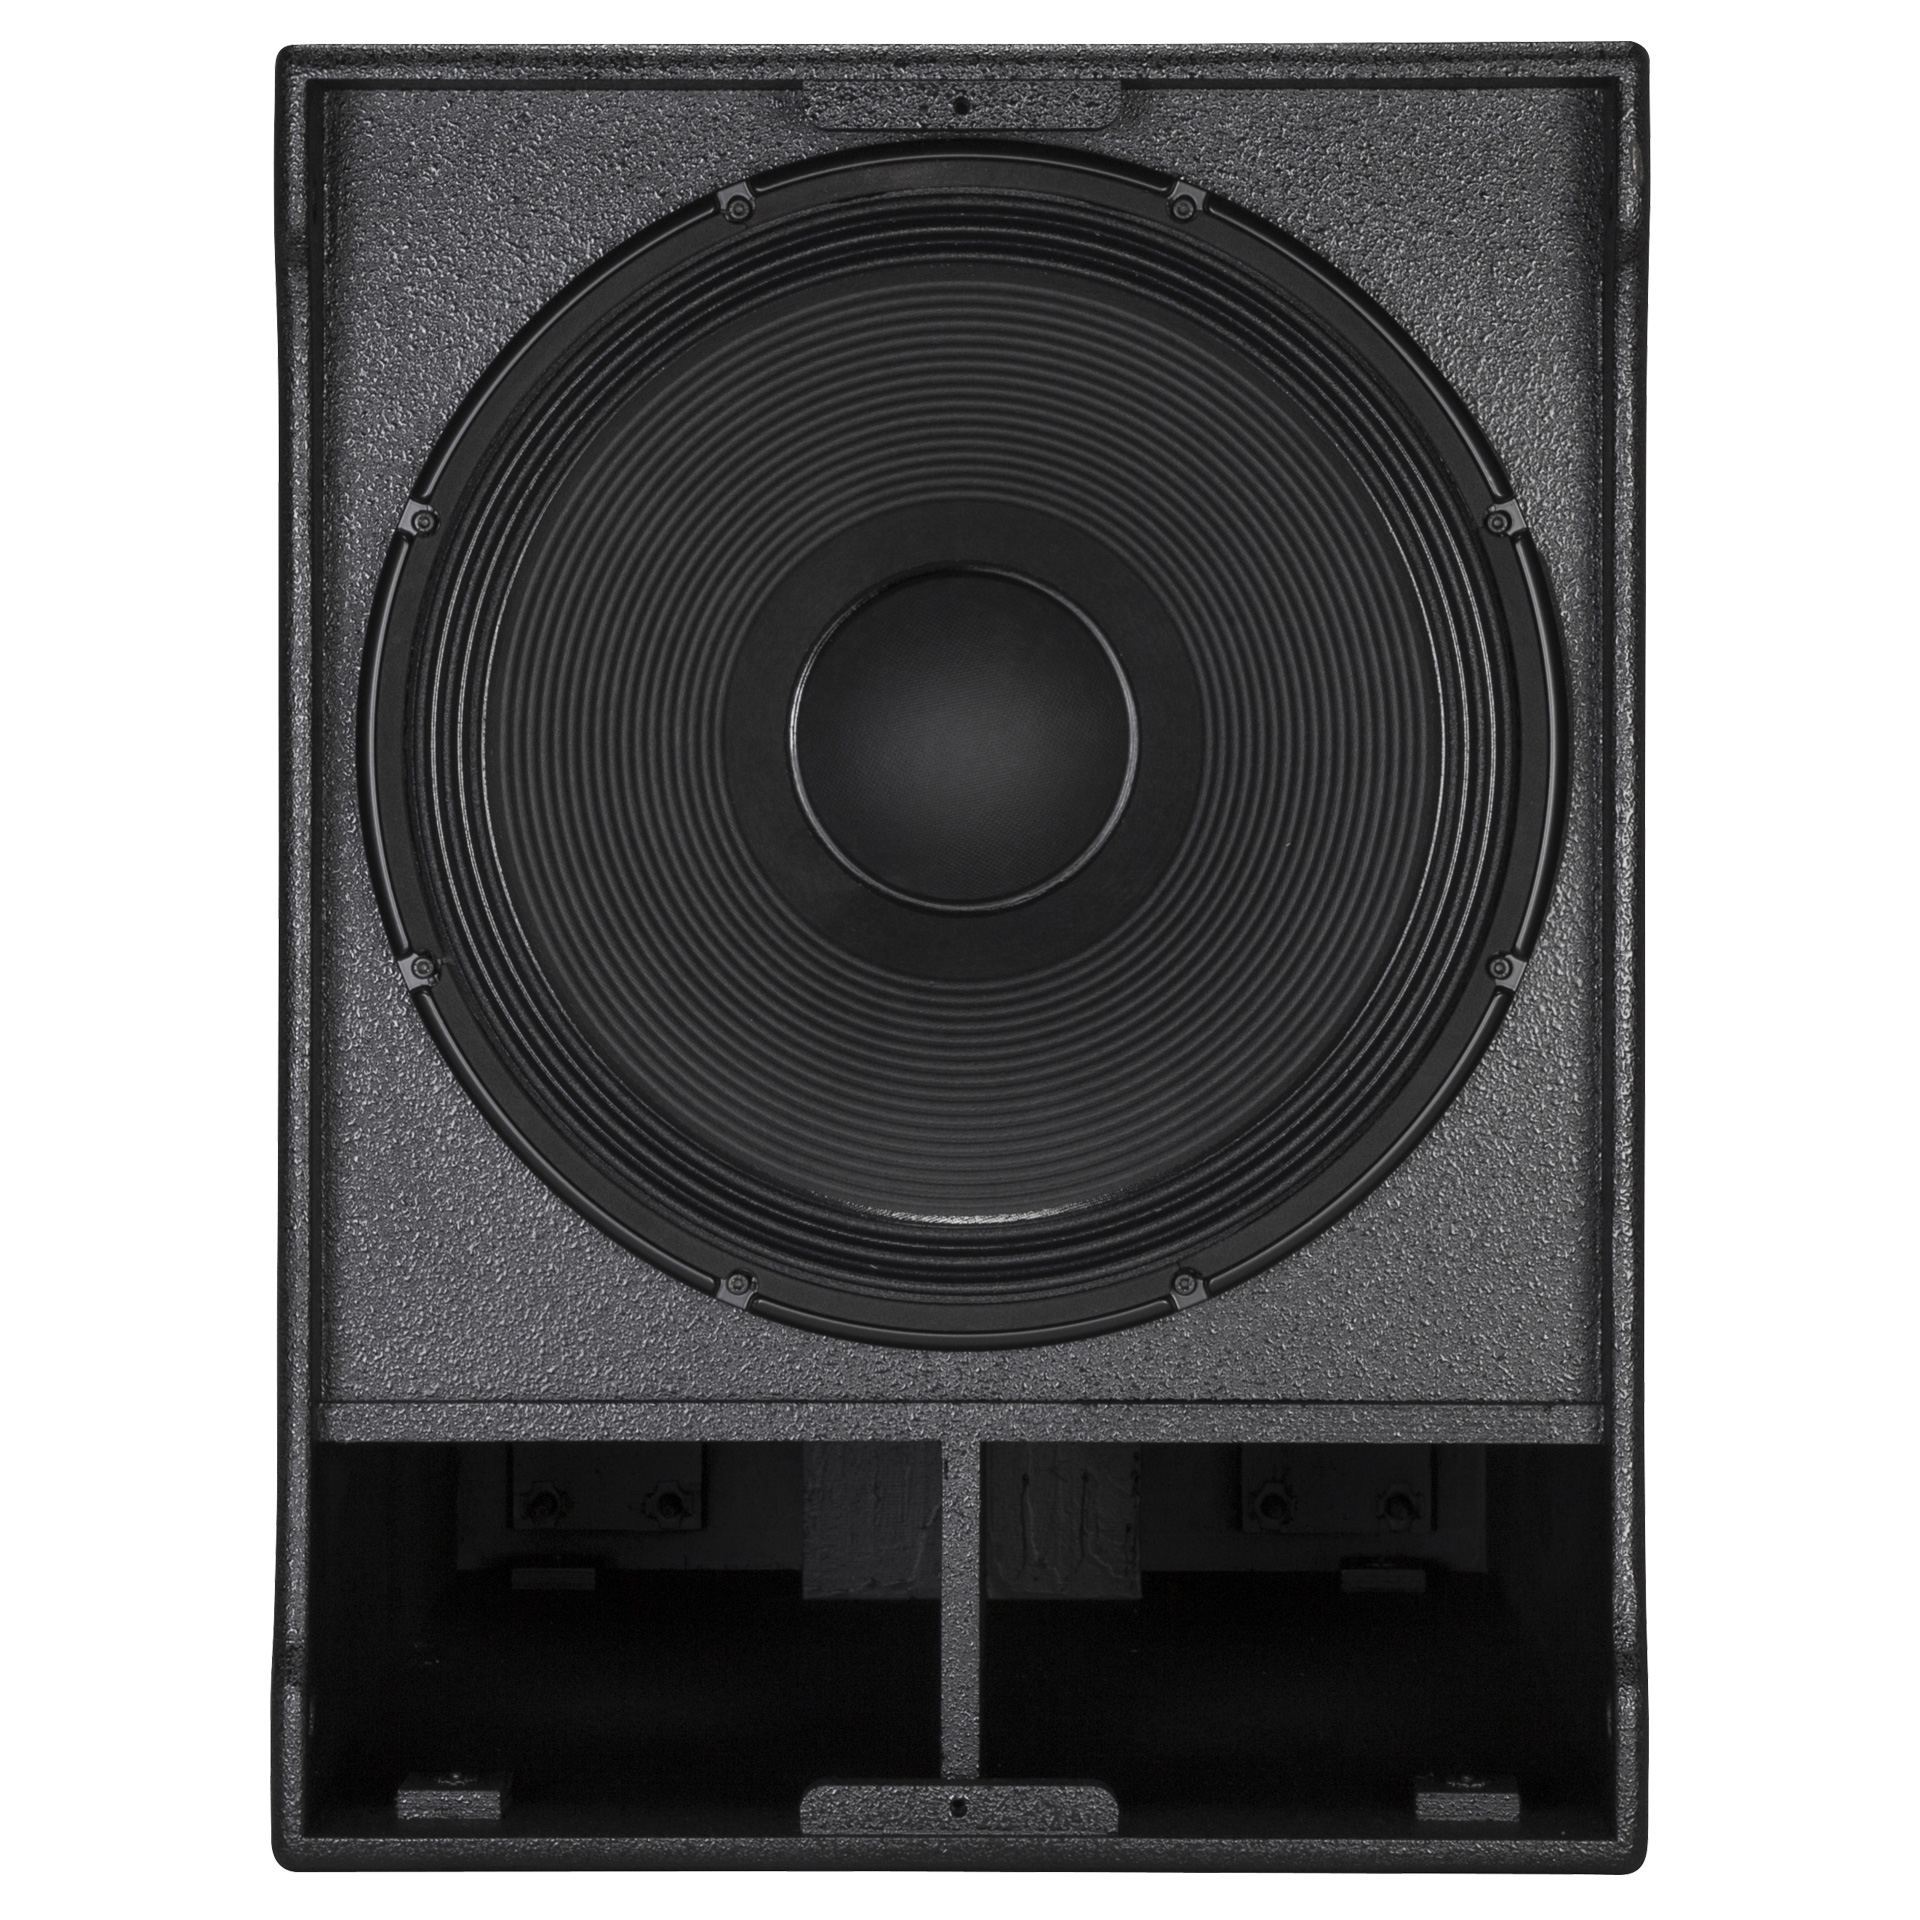 Rcf Sub 8003-as Ii - Actieve subwoofer - Variation 2